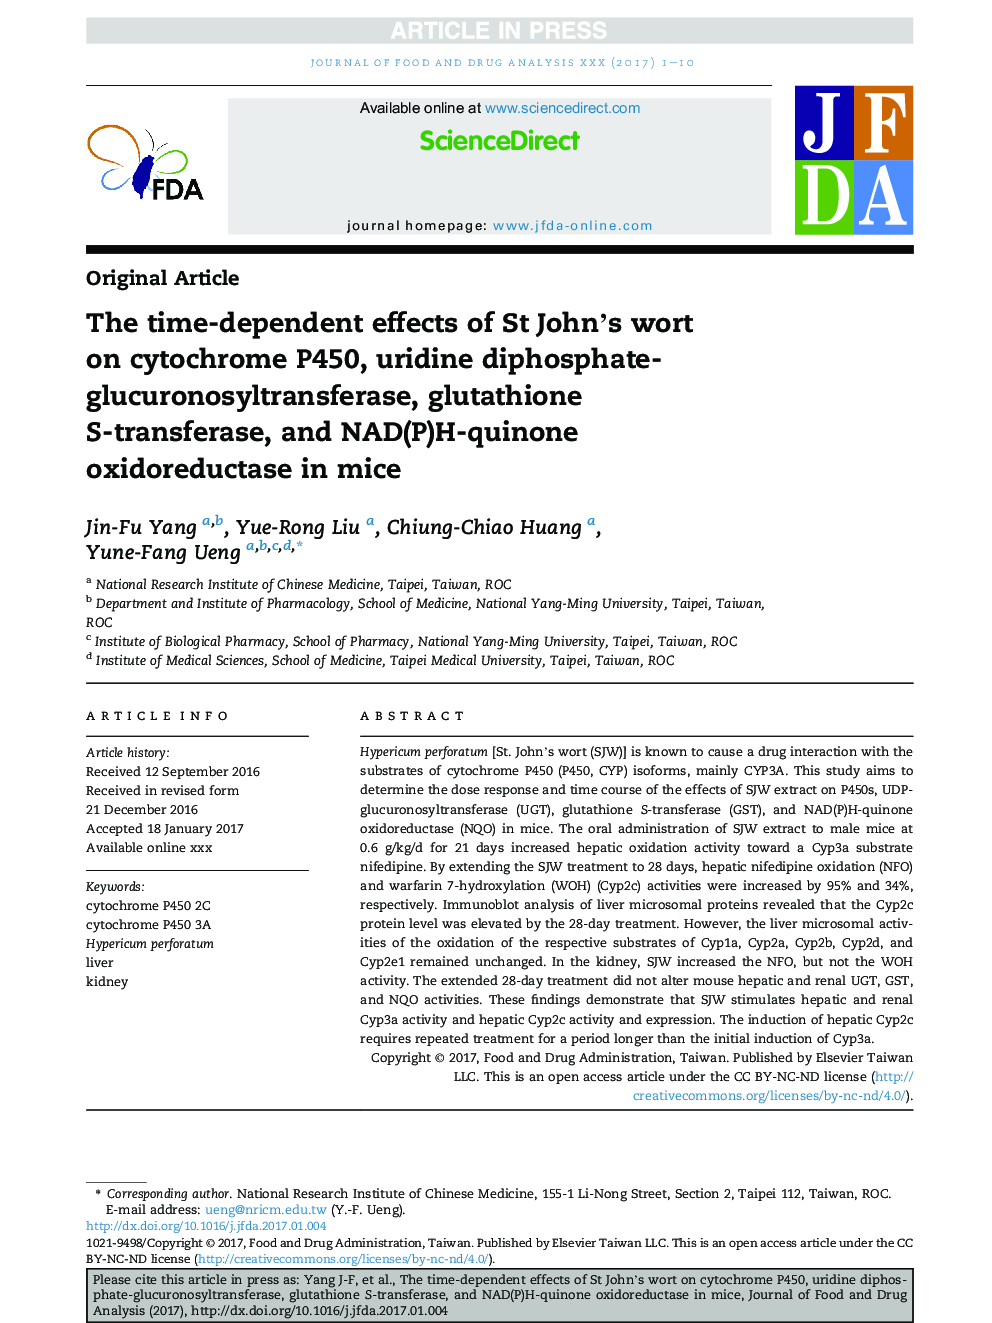 The time-dependent effects of St John's wort onÂ cytochrome P450, uridine diphosphate-glucuronosyltransferase, glutathione S-transferase, and NAD(P)H-quinone oxidoreductase in mice